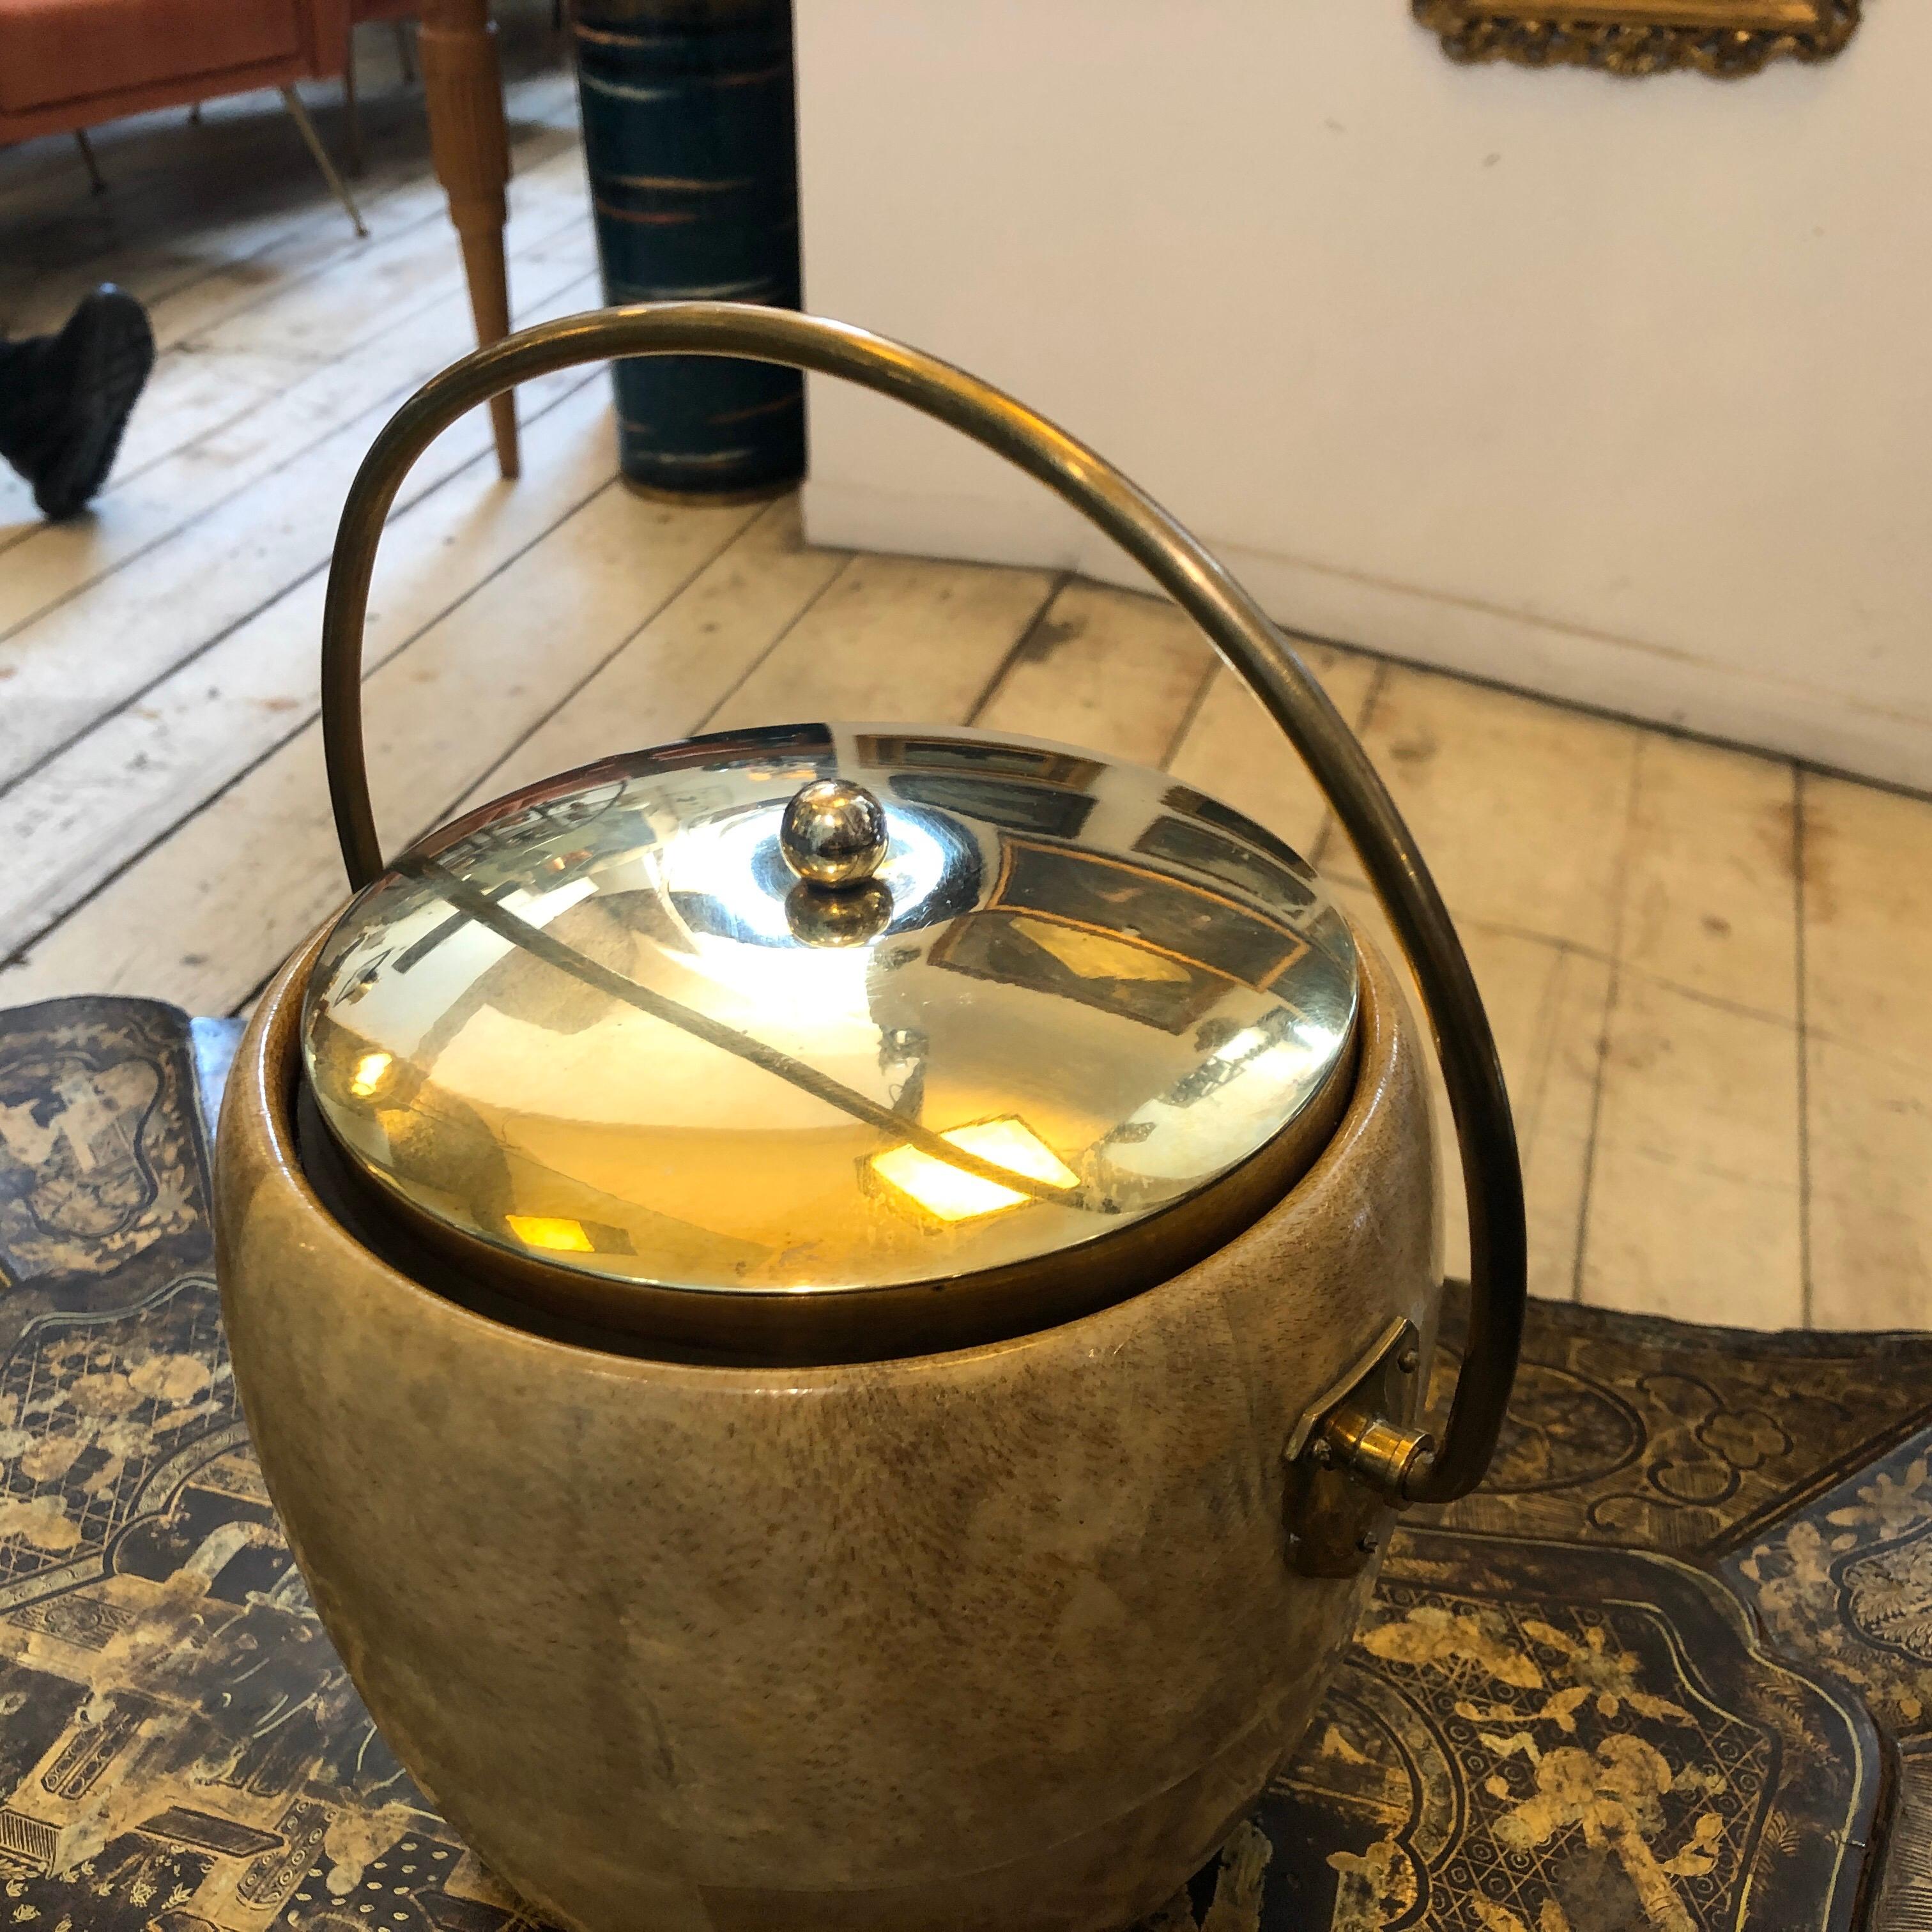 An ice bucket made in Italy in the 1960s by Macabo and designed by Aldo Tura, good conditions overall, brass in original patina.